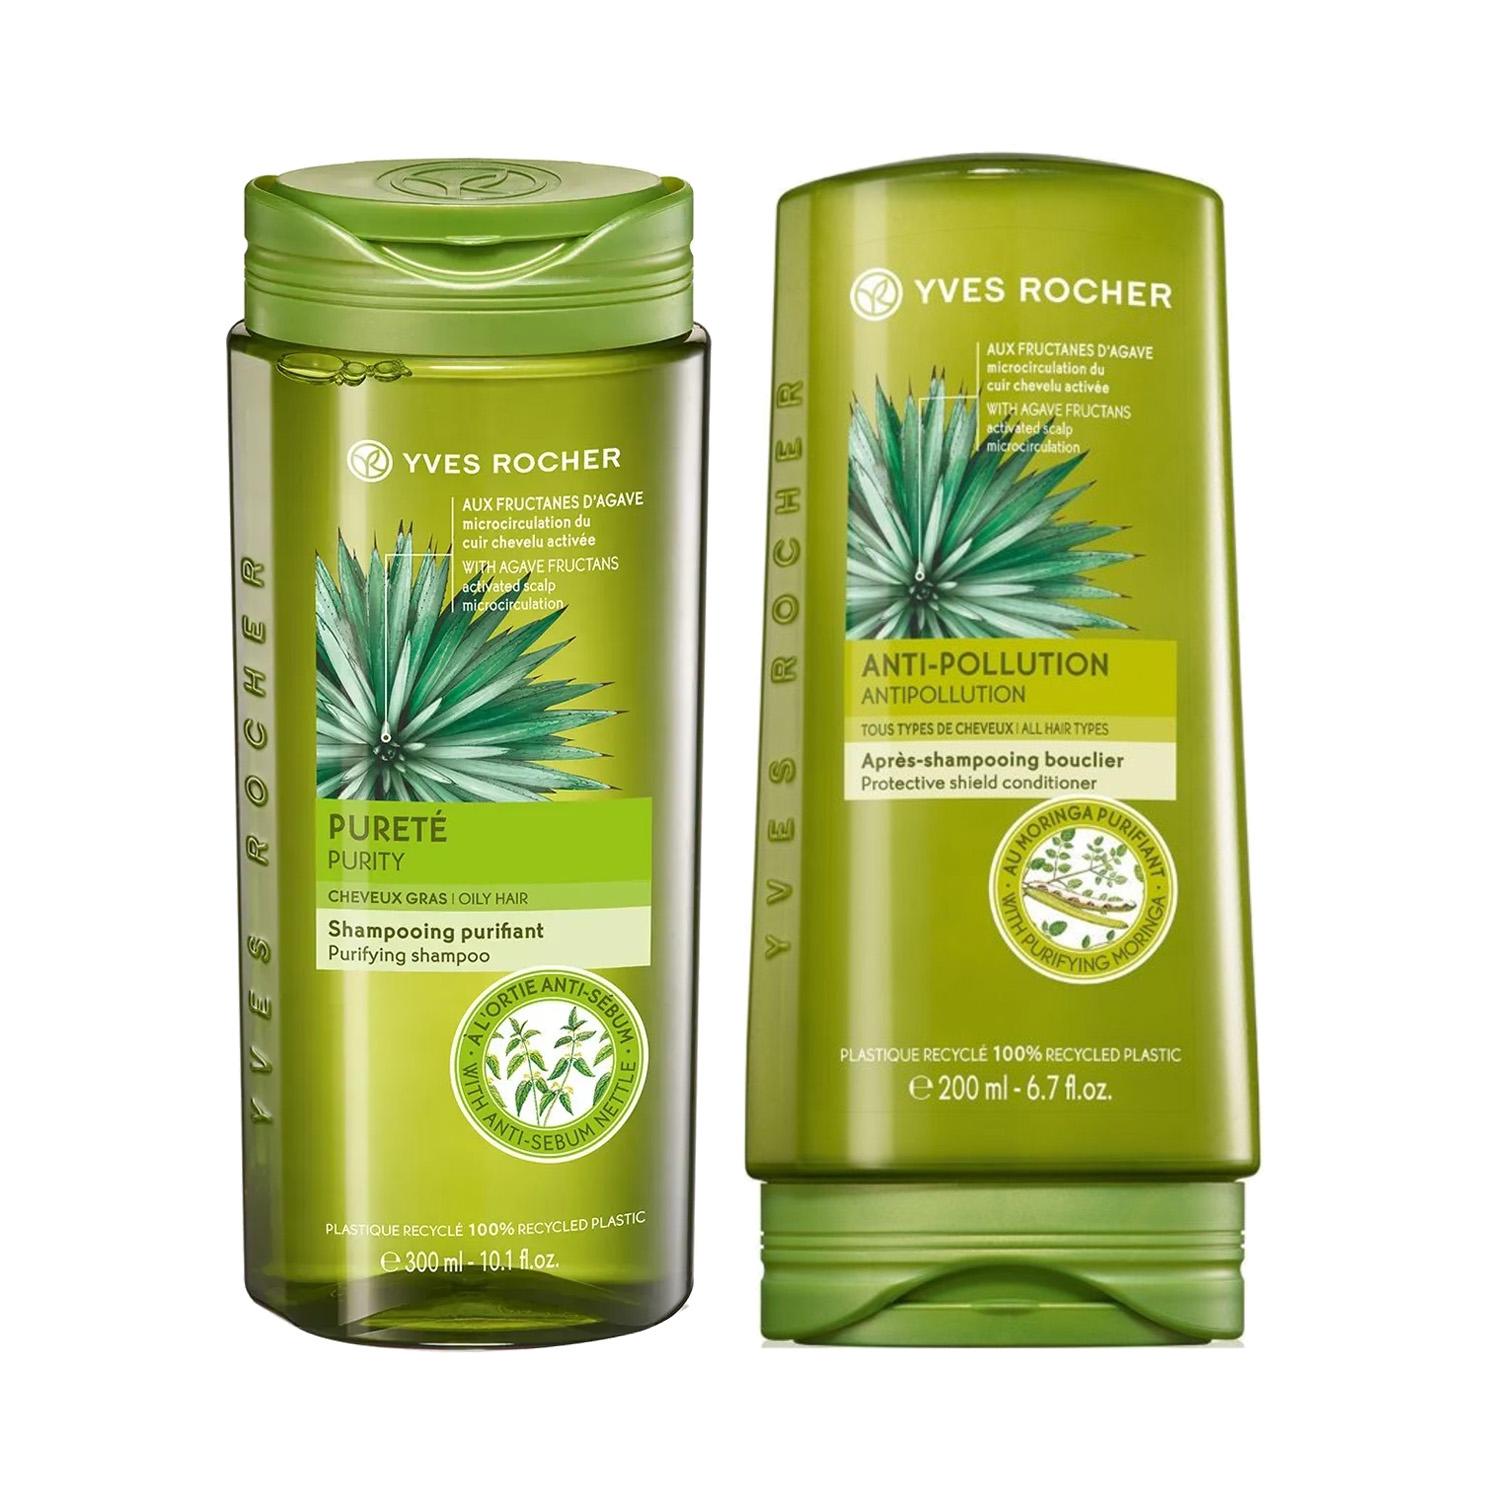 Yves Rocher | Yves Rocher Purity Shampoo & Anti Pollution conditioner Combo